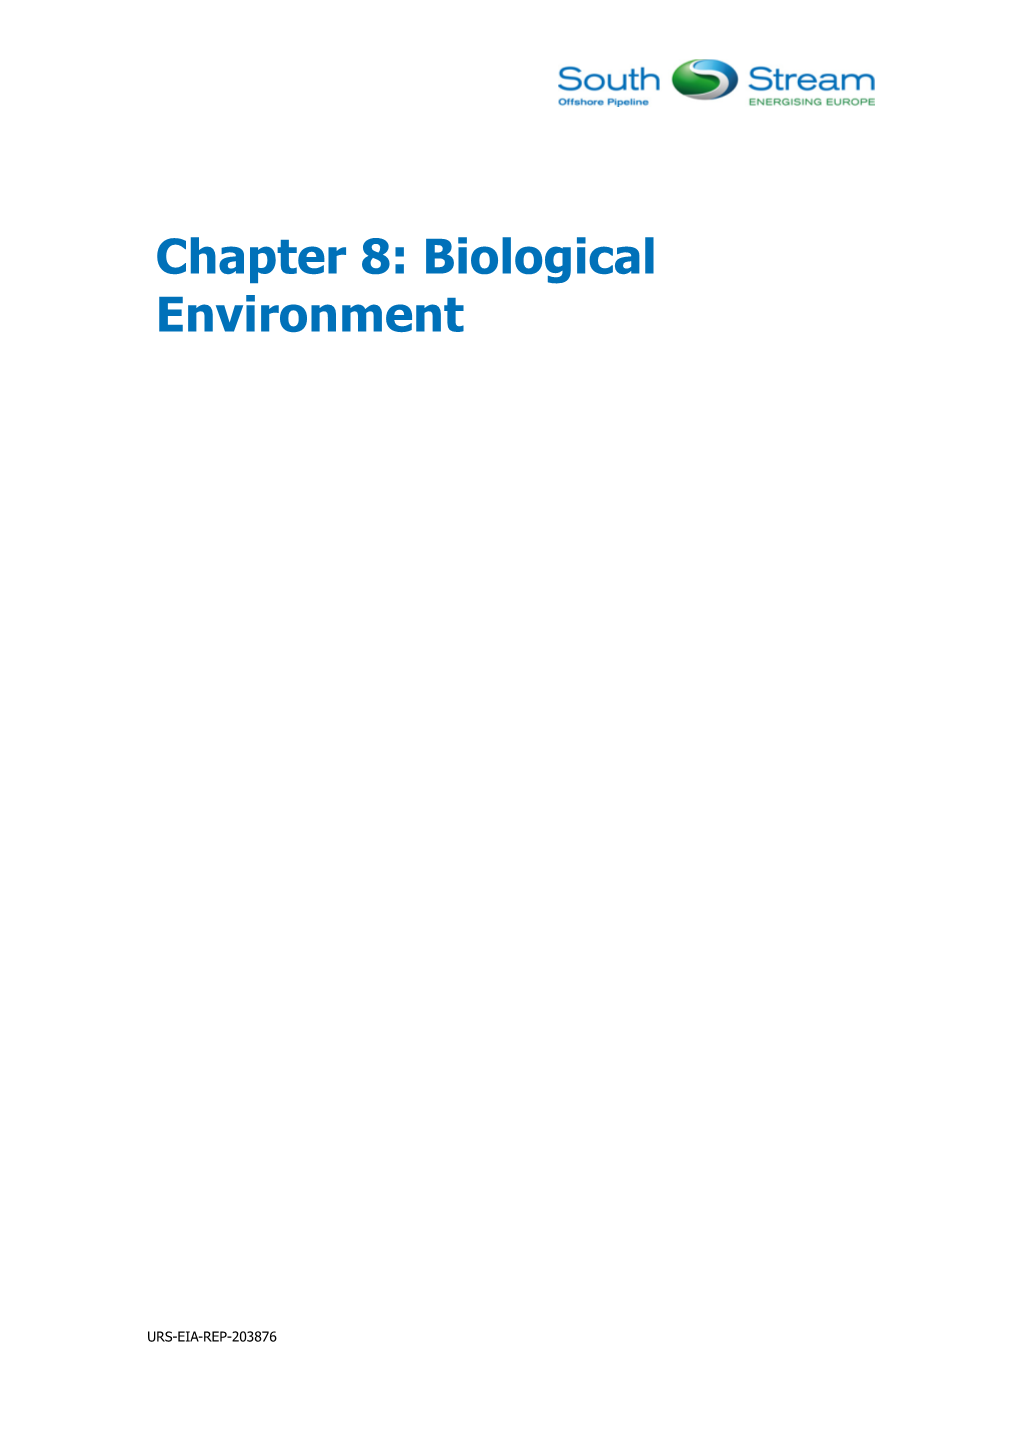 Chapter 8: Biological Environment